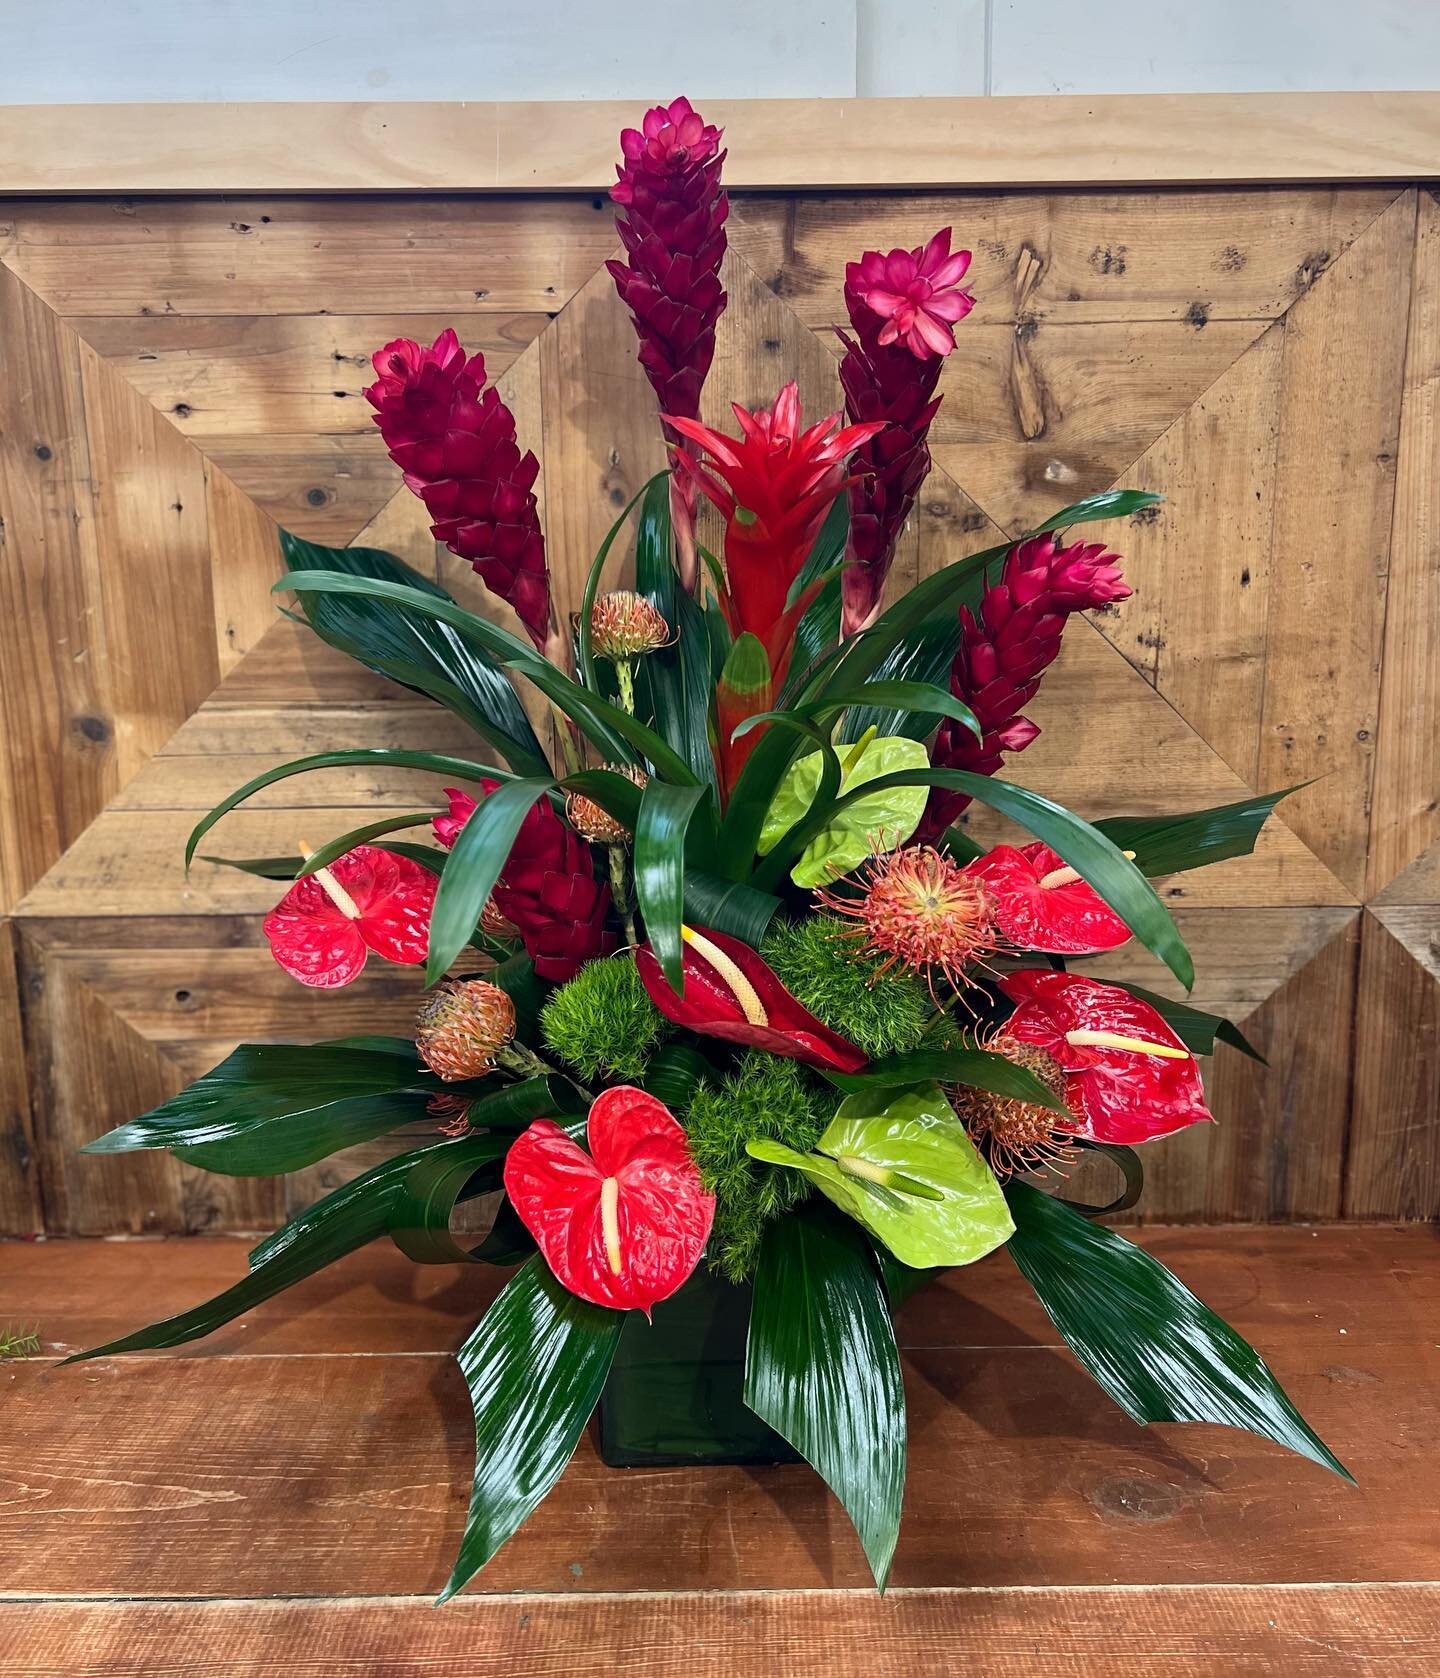 ❄️ Minnesota winter is long&mdash;being a florist and working with tropical flowers definitely helps. 10/10 would recommend! 🔥
.
#tropicalflowers #flowers #minneapolisflorist #flowerlovers #plantlover #anthurium #ginger #bromeliad #protea #fkowerpho